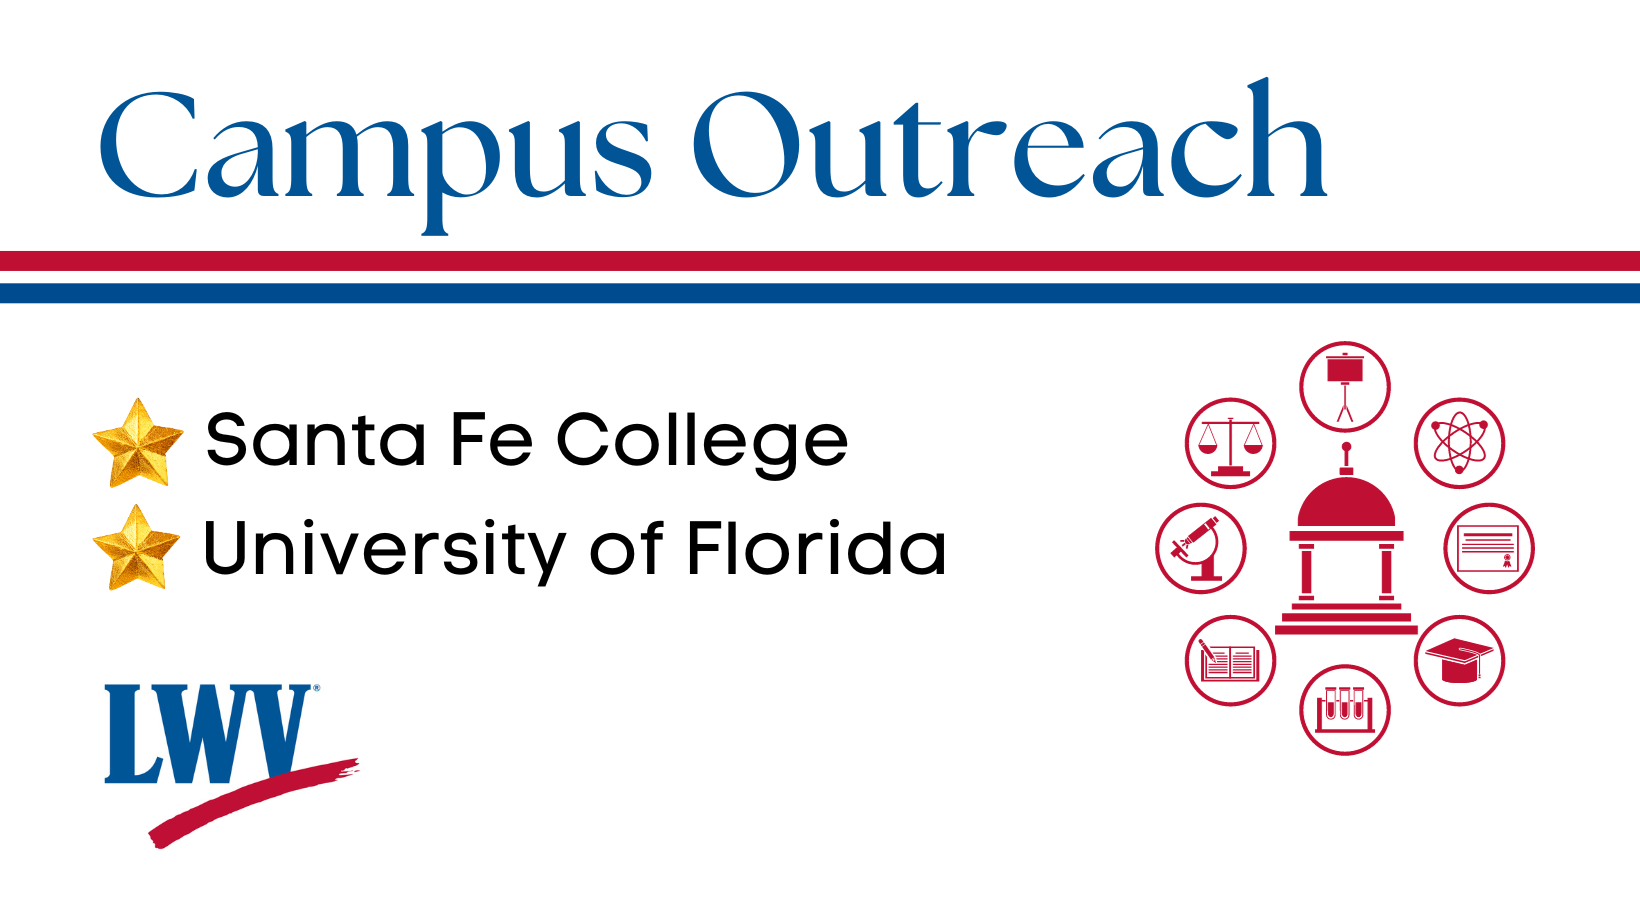 Campus Outreach SFC and UF with LWV logo on a white background and red clip art showing ornate building with disciplines representing in circles around it